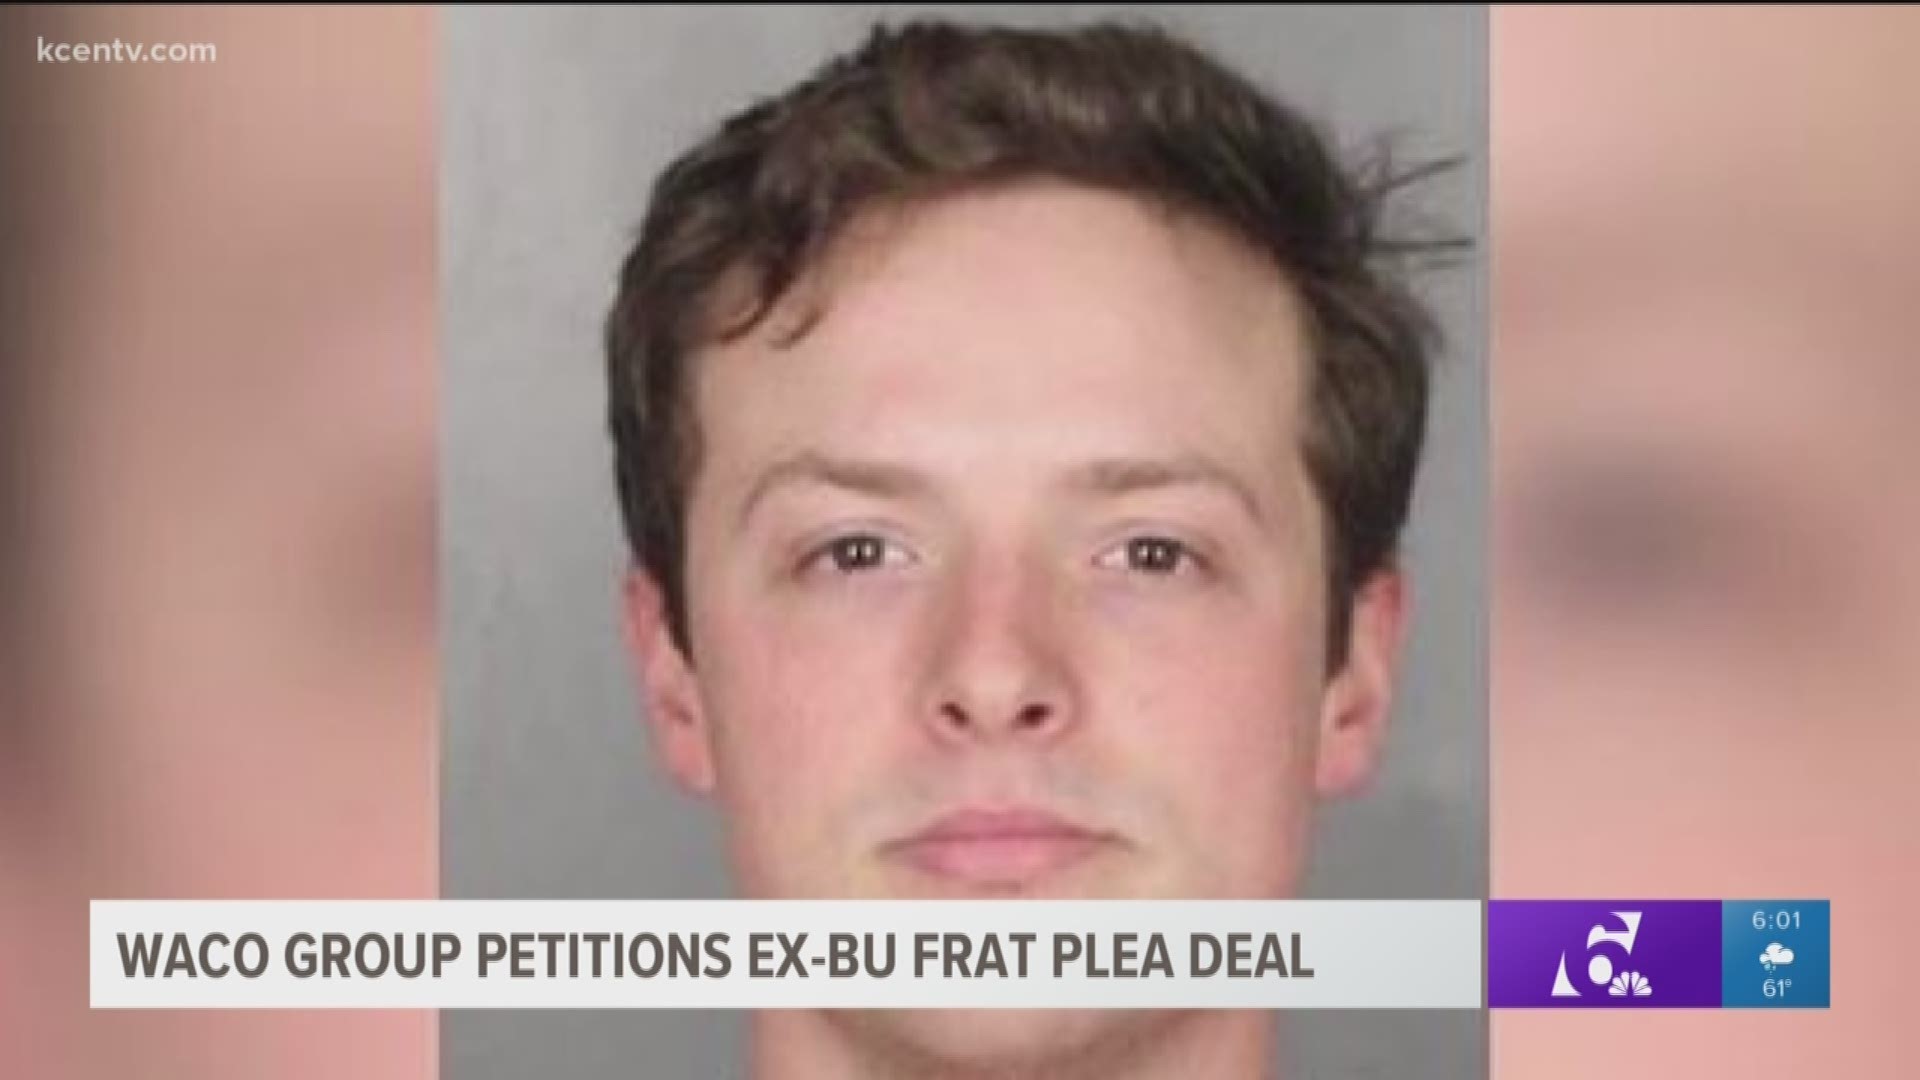 A petition asking a judge to deny a plea deal for a former Baylor fraternity president who was indicted on rape charges was started Thursday.